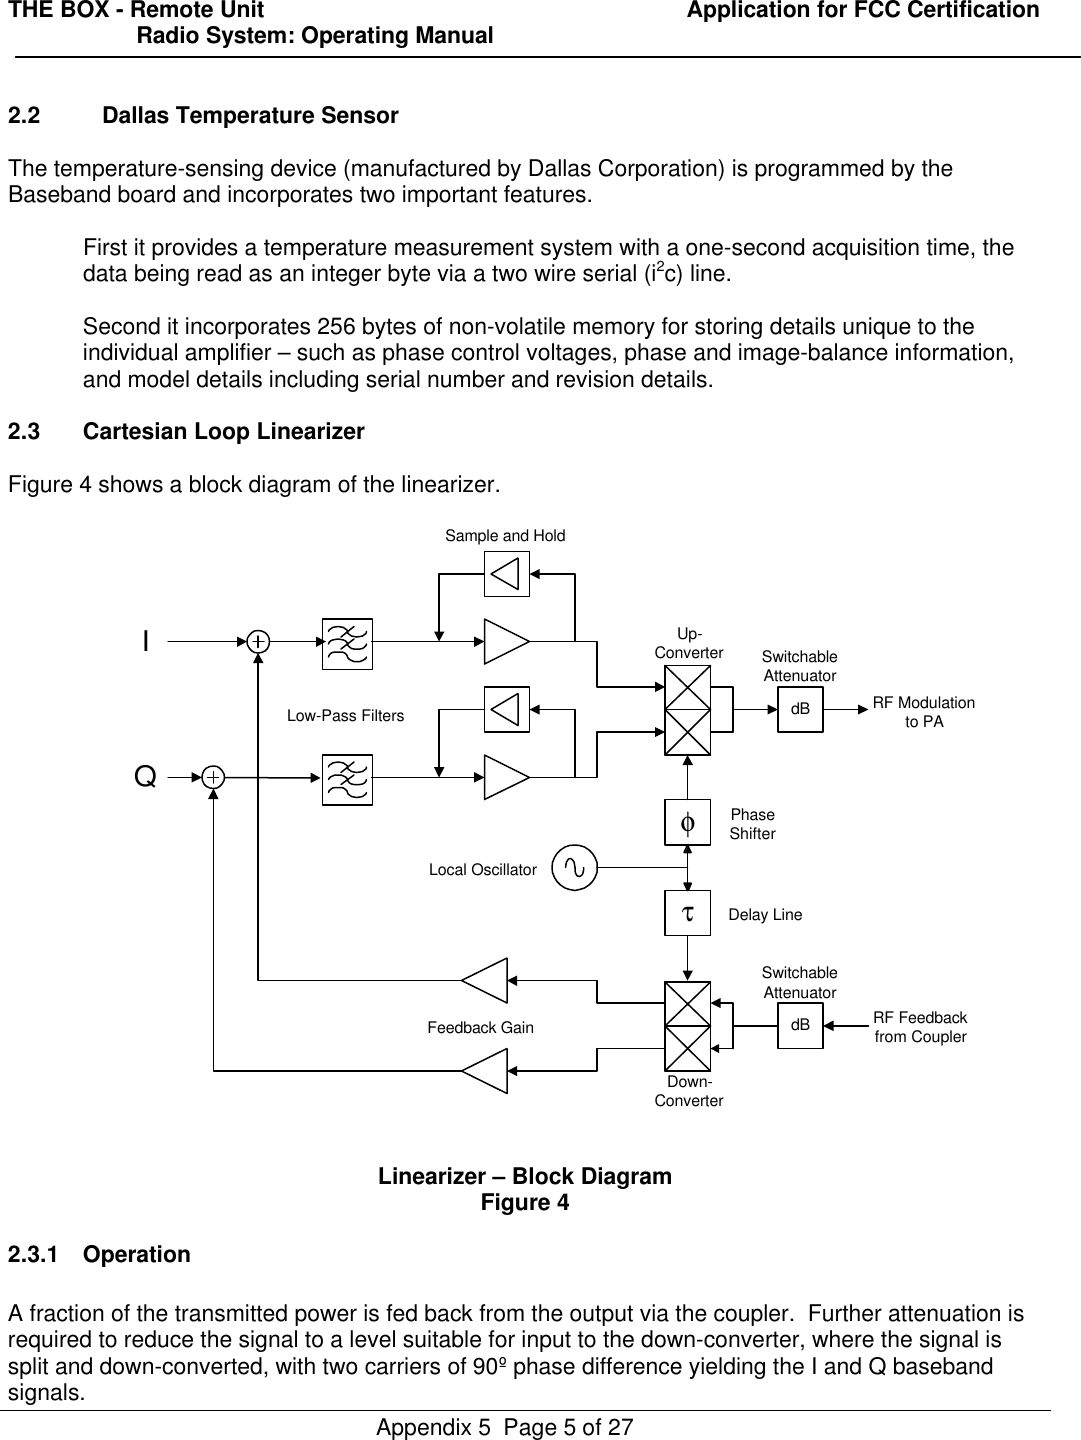 THE BOX - Remote Unit                                                                  Application for FCC Certification                    Radio System: Operating ManualAppendix 5  Page 5 of 272.2 Dallas Temperature SensorThe temperature-sensing device (manufactured by Dallas Corporation) is programmed by theBaseband board and incorporates two important features.First it provides a temperature measurement system with a one-second acquisition time, thedata being read as an integer byte via a two wire serial (i2c) line.Second it incorporates 256 bytes of non-volatile memory for storing details unique to theindividual amplifier – such as phase control voltages, phase and image-balance information,and model details including serial number and revision details.2.3 Cartesian Loop LinearizerFigure 4 shows a block diagram of the linearizer.Linearizer – Block DiagramFigure 42.3.1 OperationA fraction of the transmitted power is fed back from the output via the coupler.  Further attenuation isrequired to reduce the signal to a level suitable for input to the down-converter, where the signal issplit and down-converted, with two carriers of 90º phase difference yielding the I and Q basebandsignals.φdBdBτIQLow-Pass FiltersLocal OscillatorPhaseShifterDelay LineRF Feedbackfrom CouplerRF Modulationto PAFeedback GainSample and HoldSwitchableAttenuatorSwitchableAttenuatorUp-ConverterDown-Converter